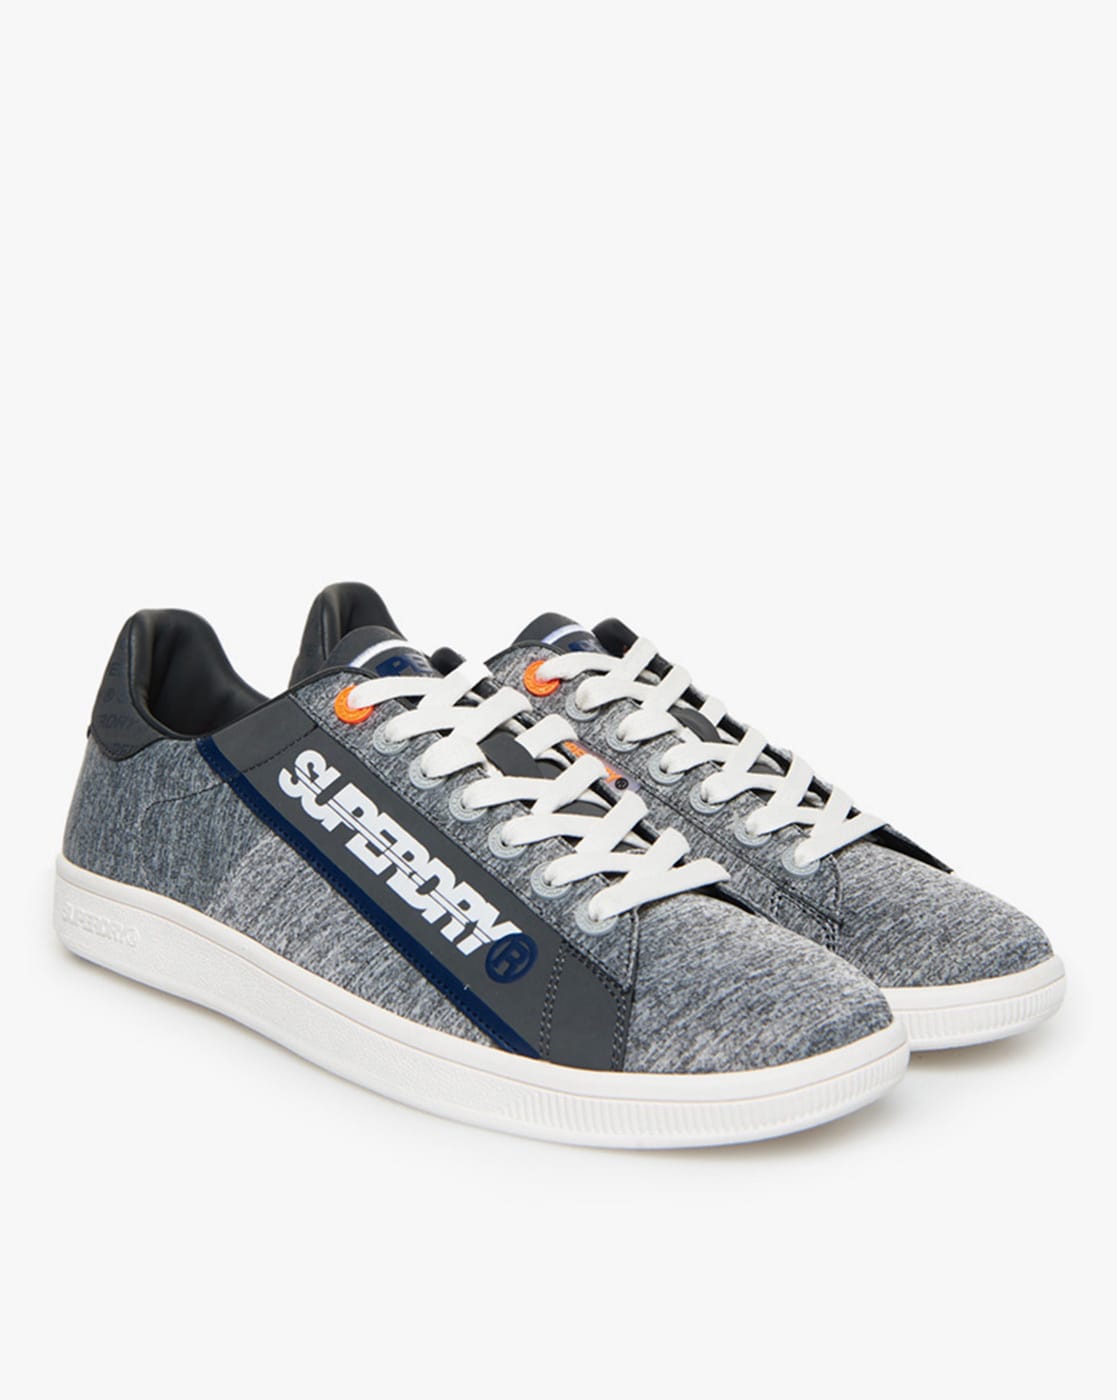 superdry tennis shoes